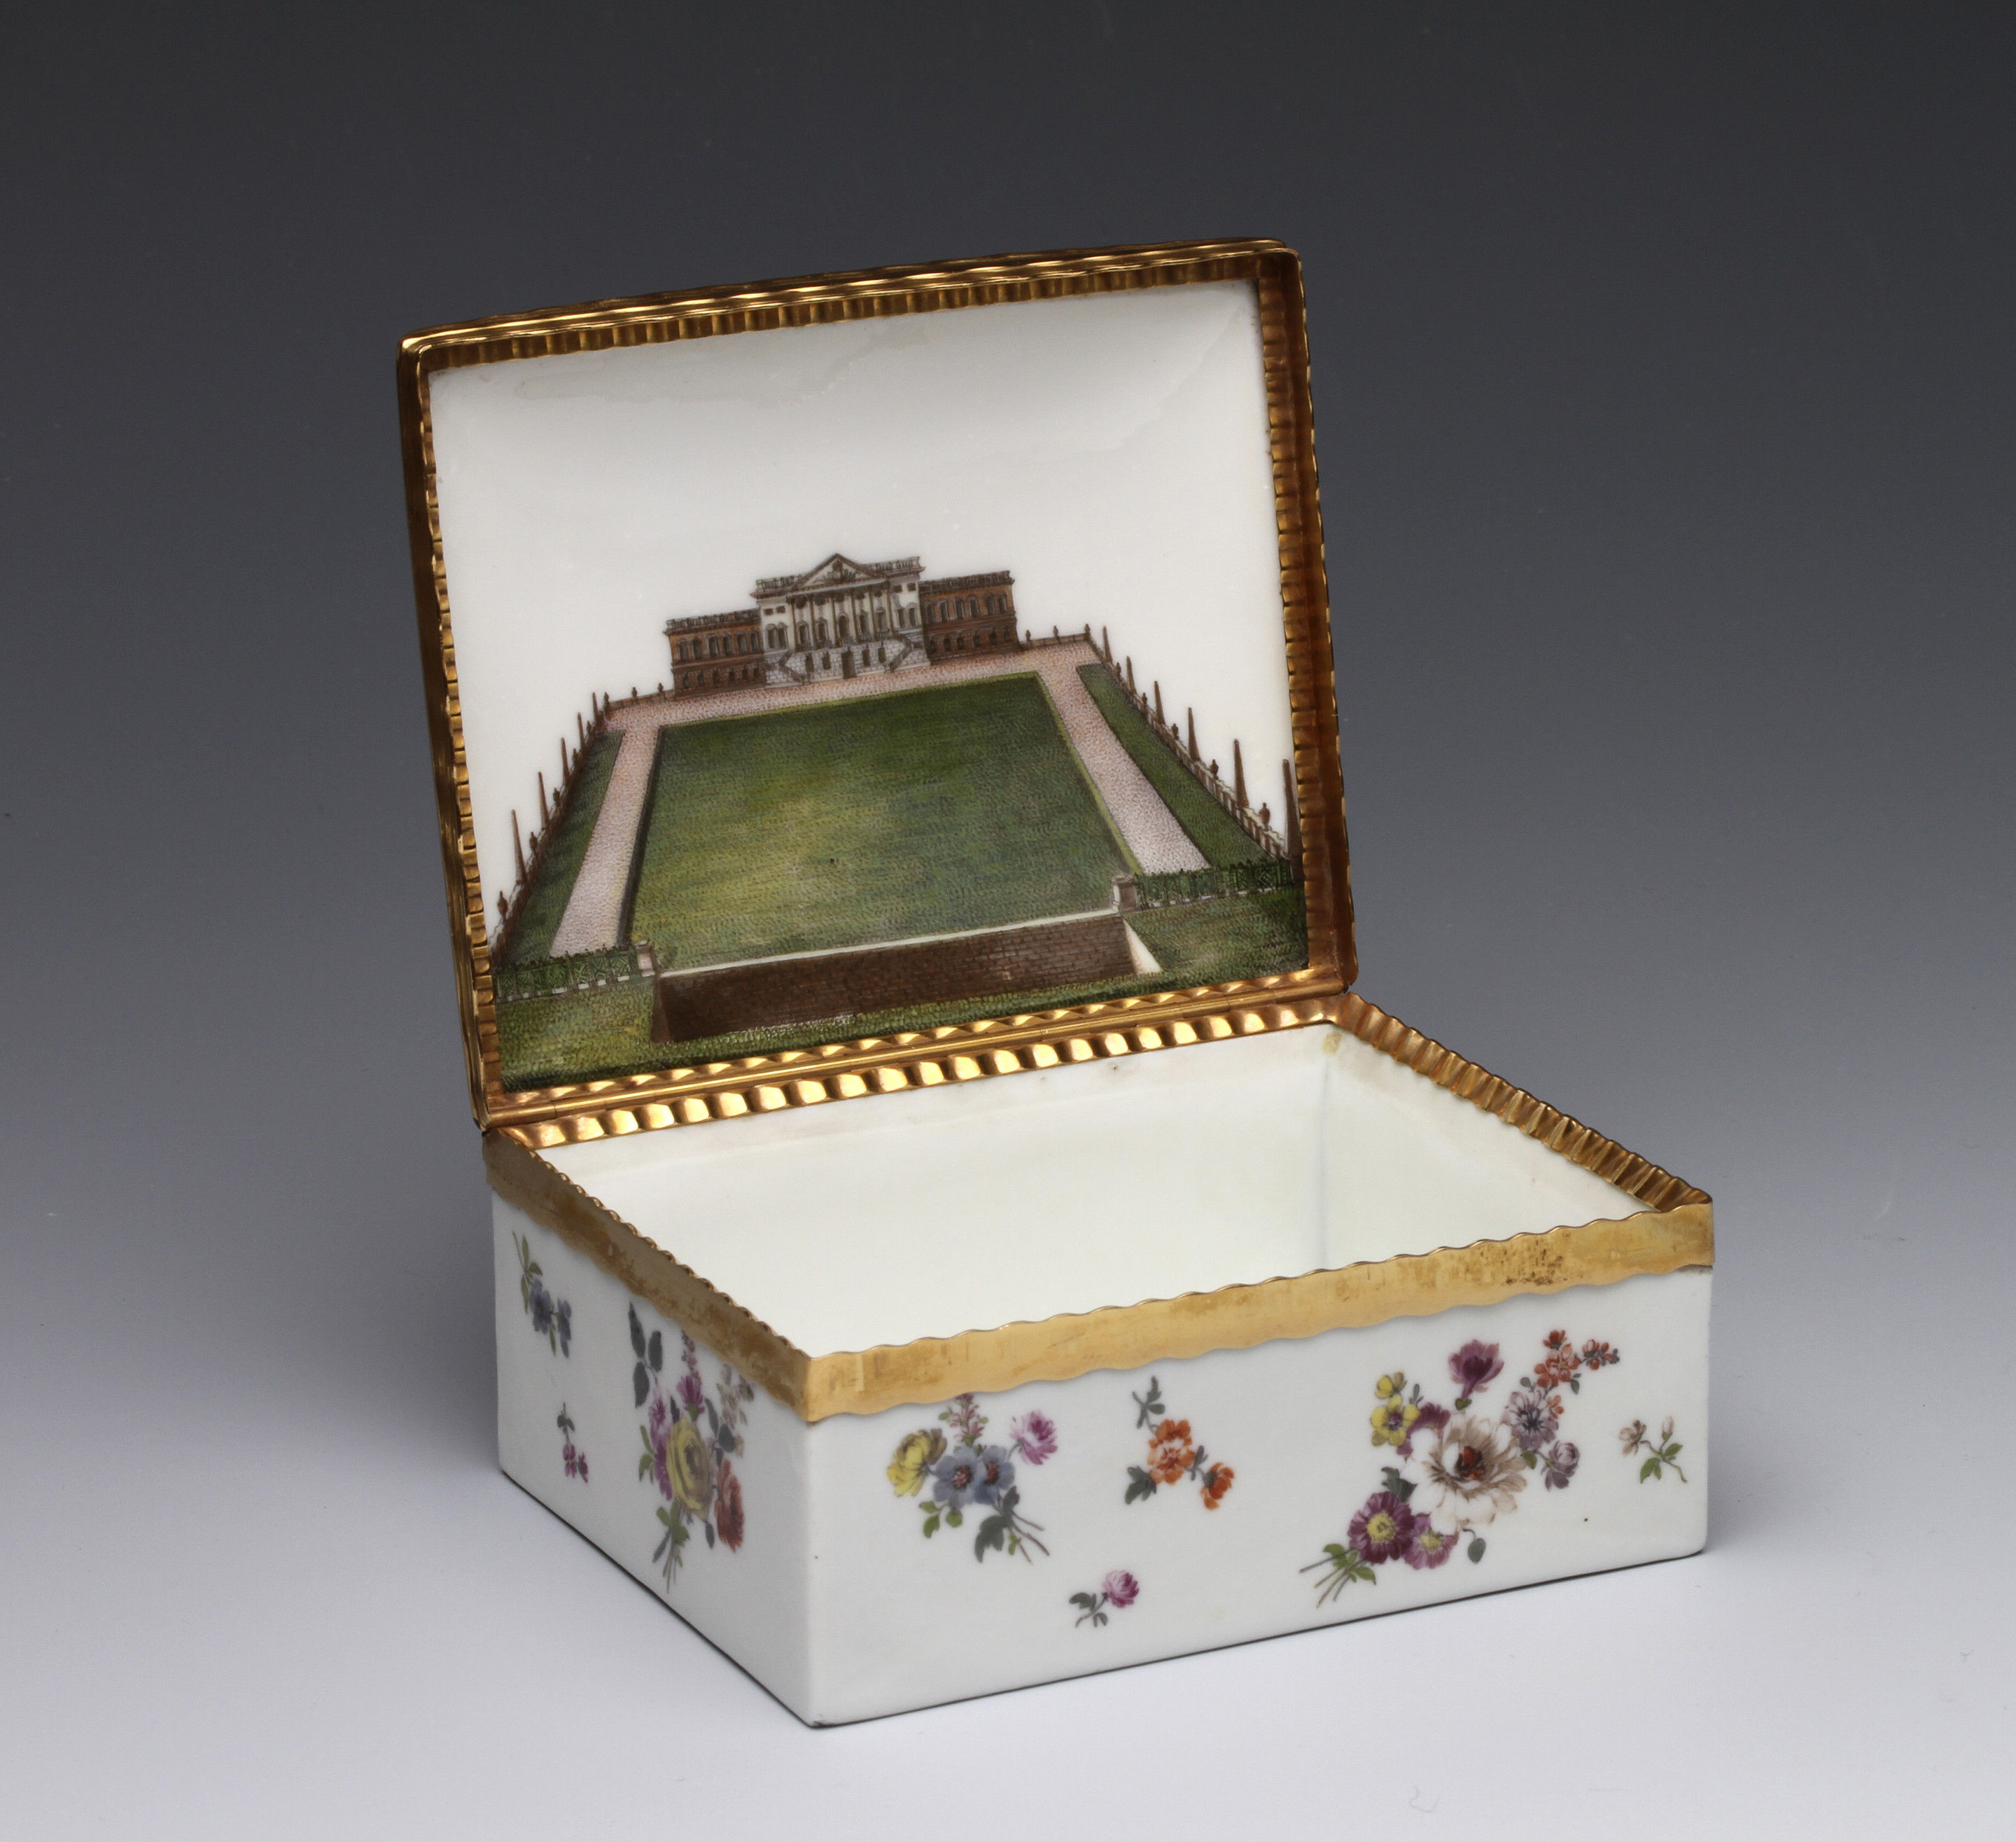 A Meissen gold-mounted table snuff box painted with a view of Wanstead House